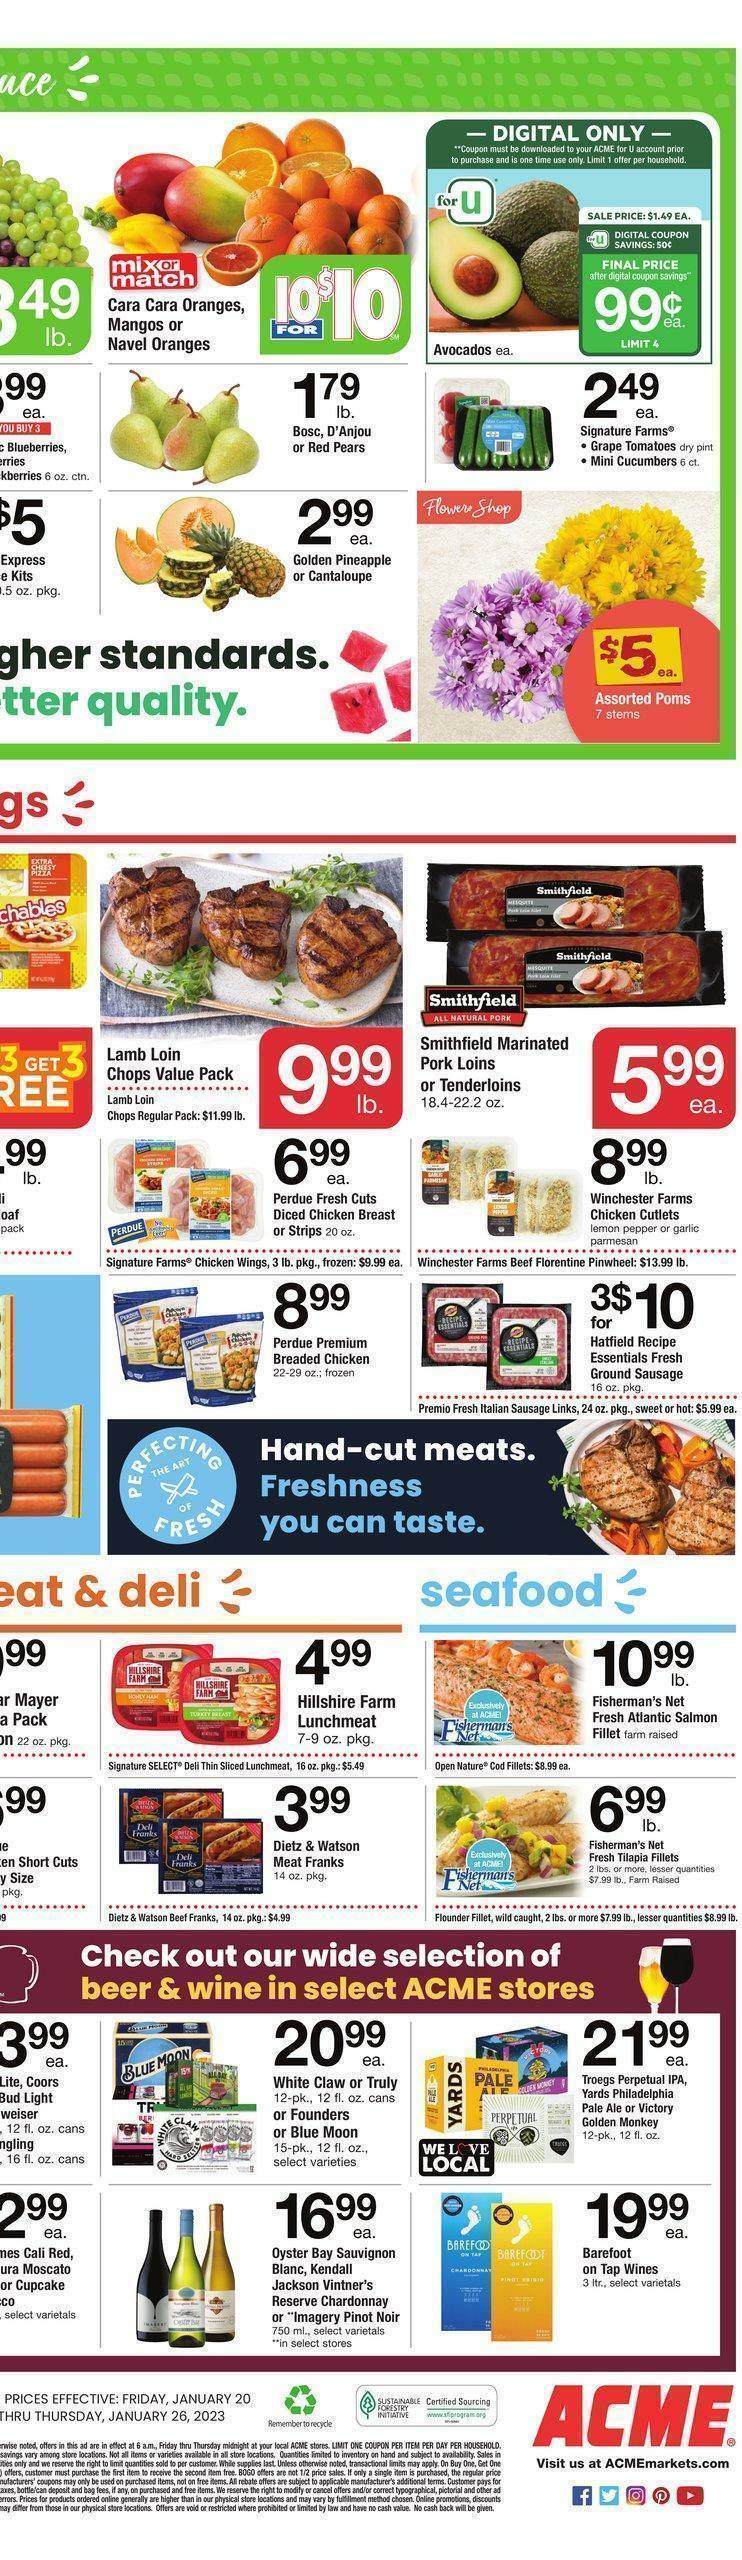 ACME Markets Weekly Ad from January 20